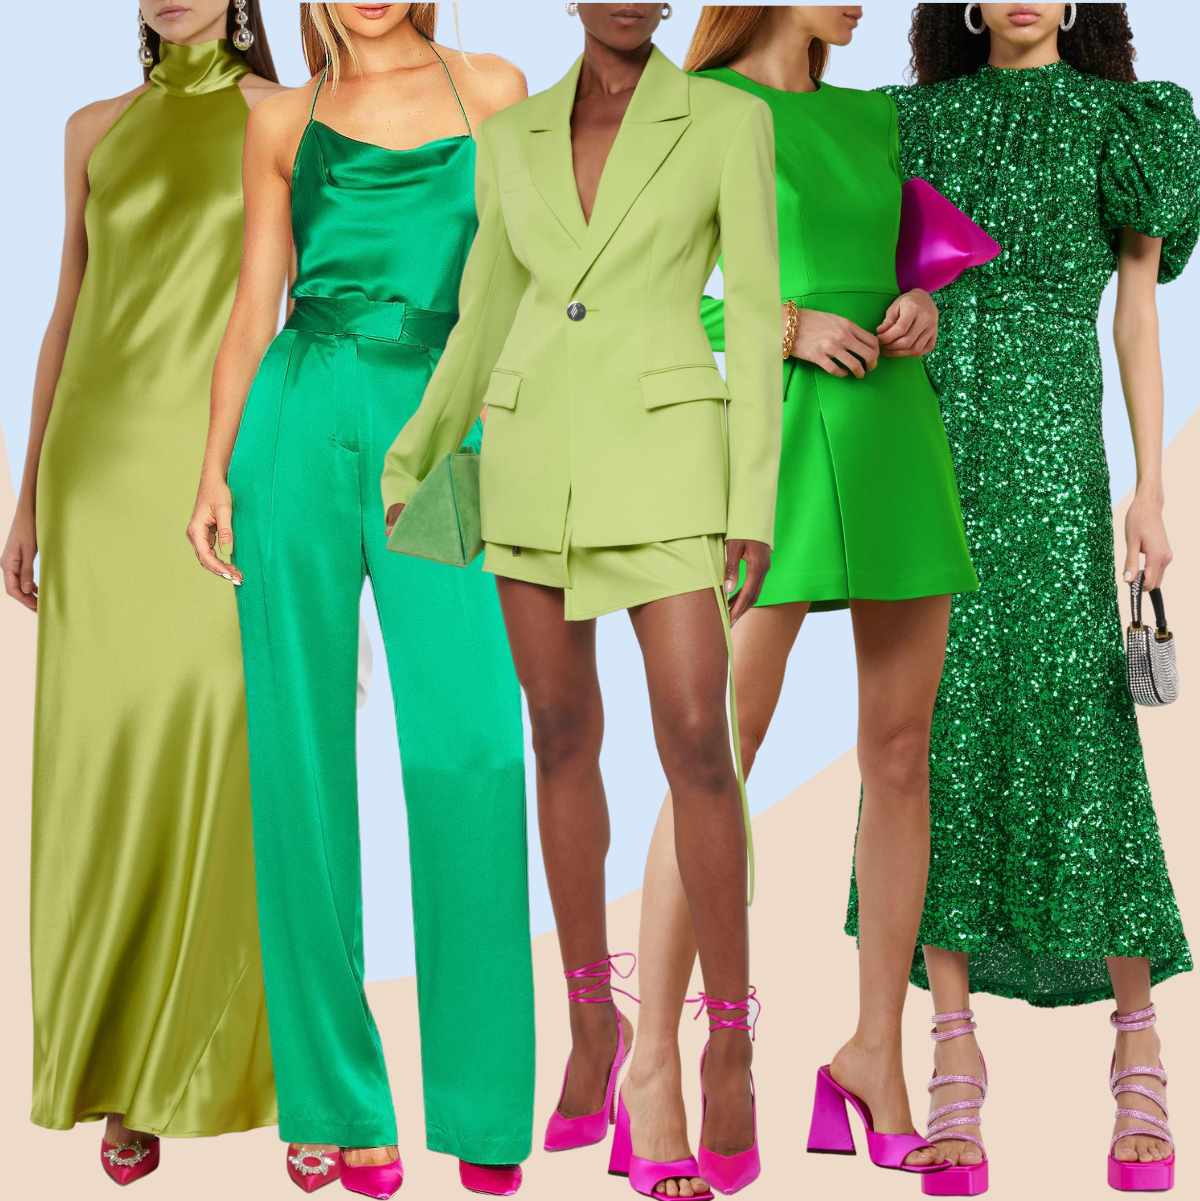 Collage of 5 women wearing Barbie core fashion shoes with green outfits.